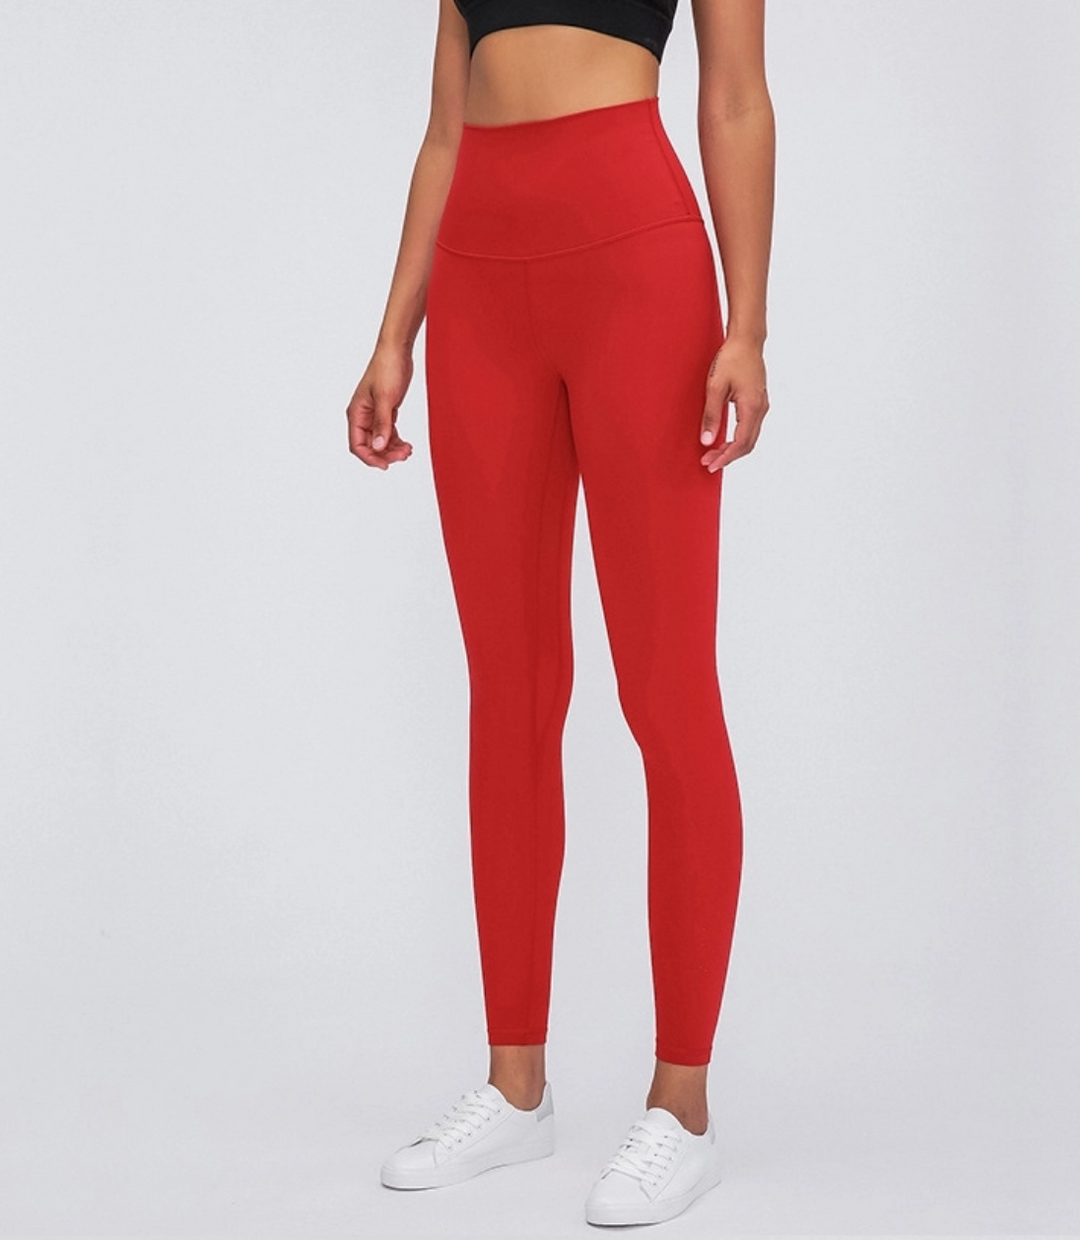 Easy Stretch 7/8 *Seamless  Leggings in Fire Red